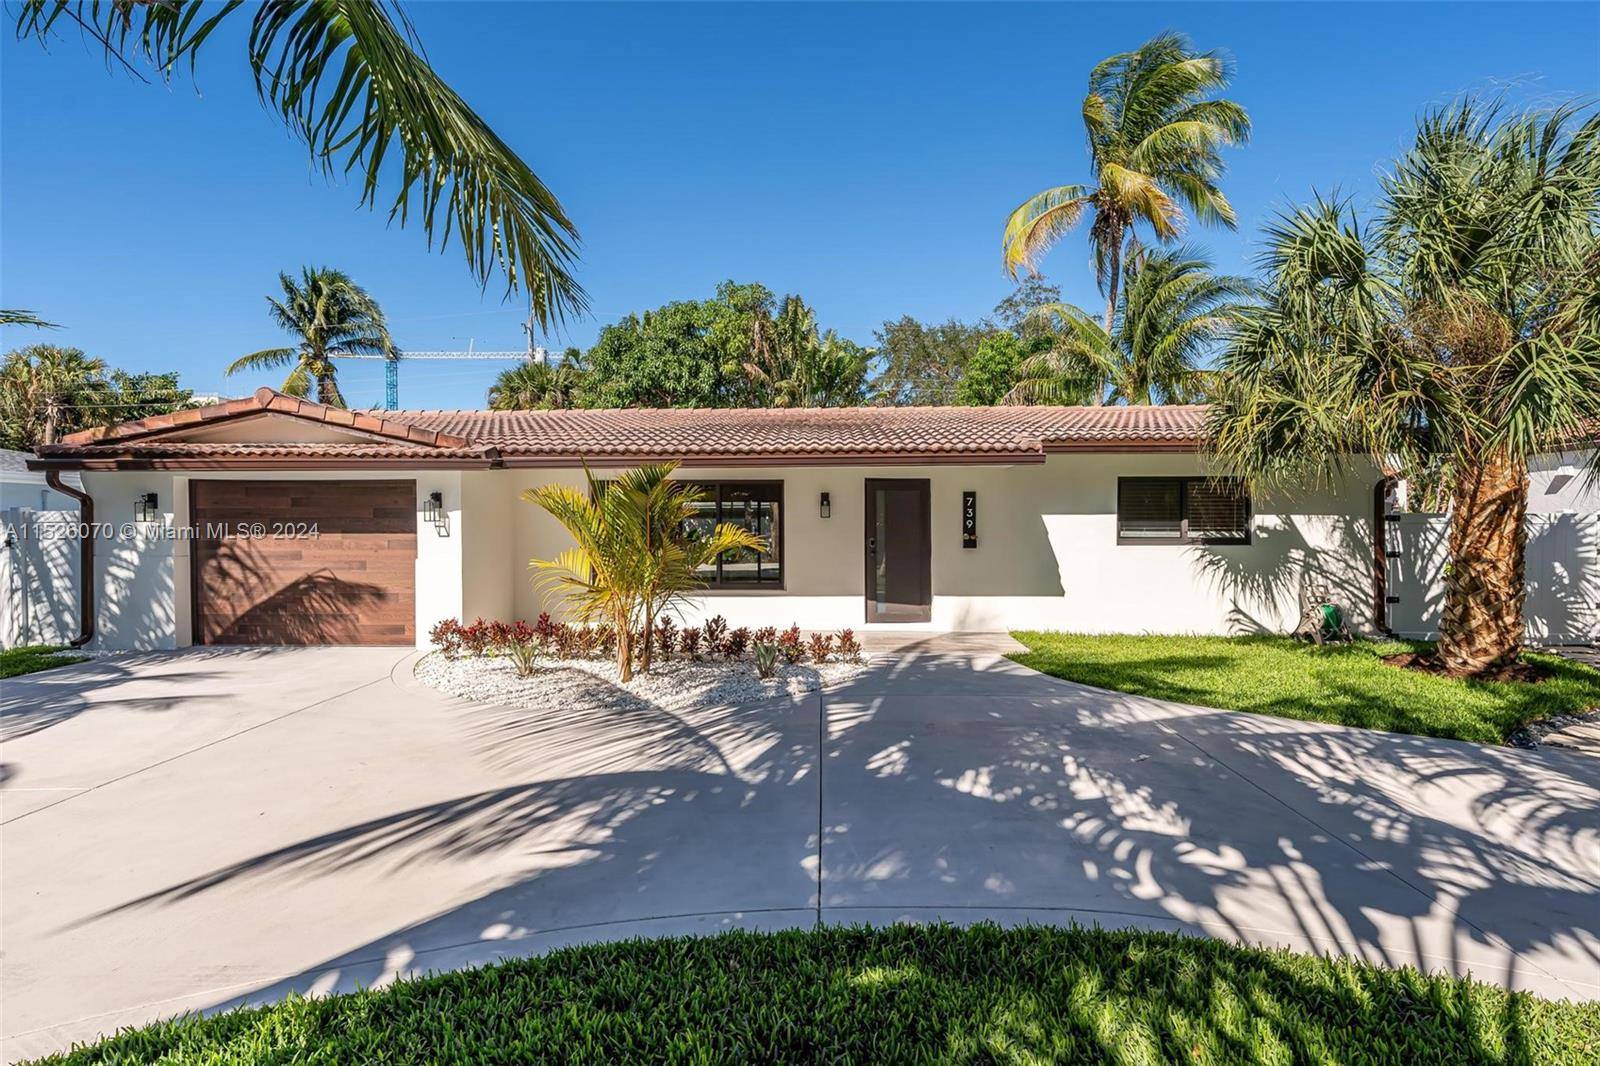 This resplendent 3 bedroom, 2 bathroom residence beckons those seeking the epitome of the South Florida lifestyle.